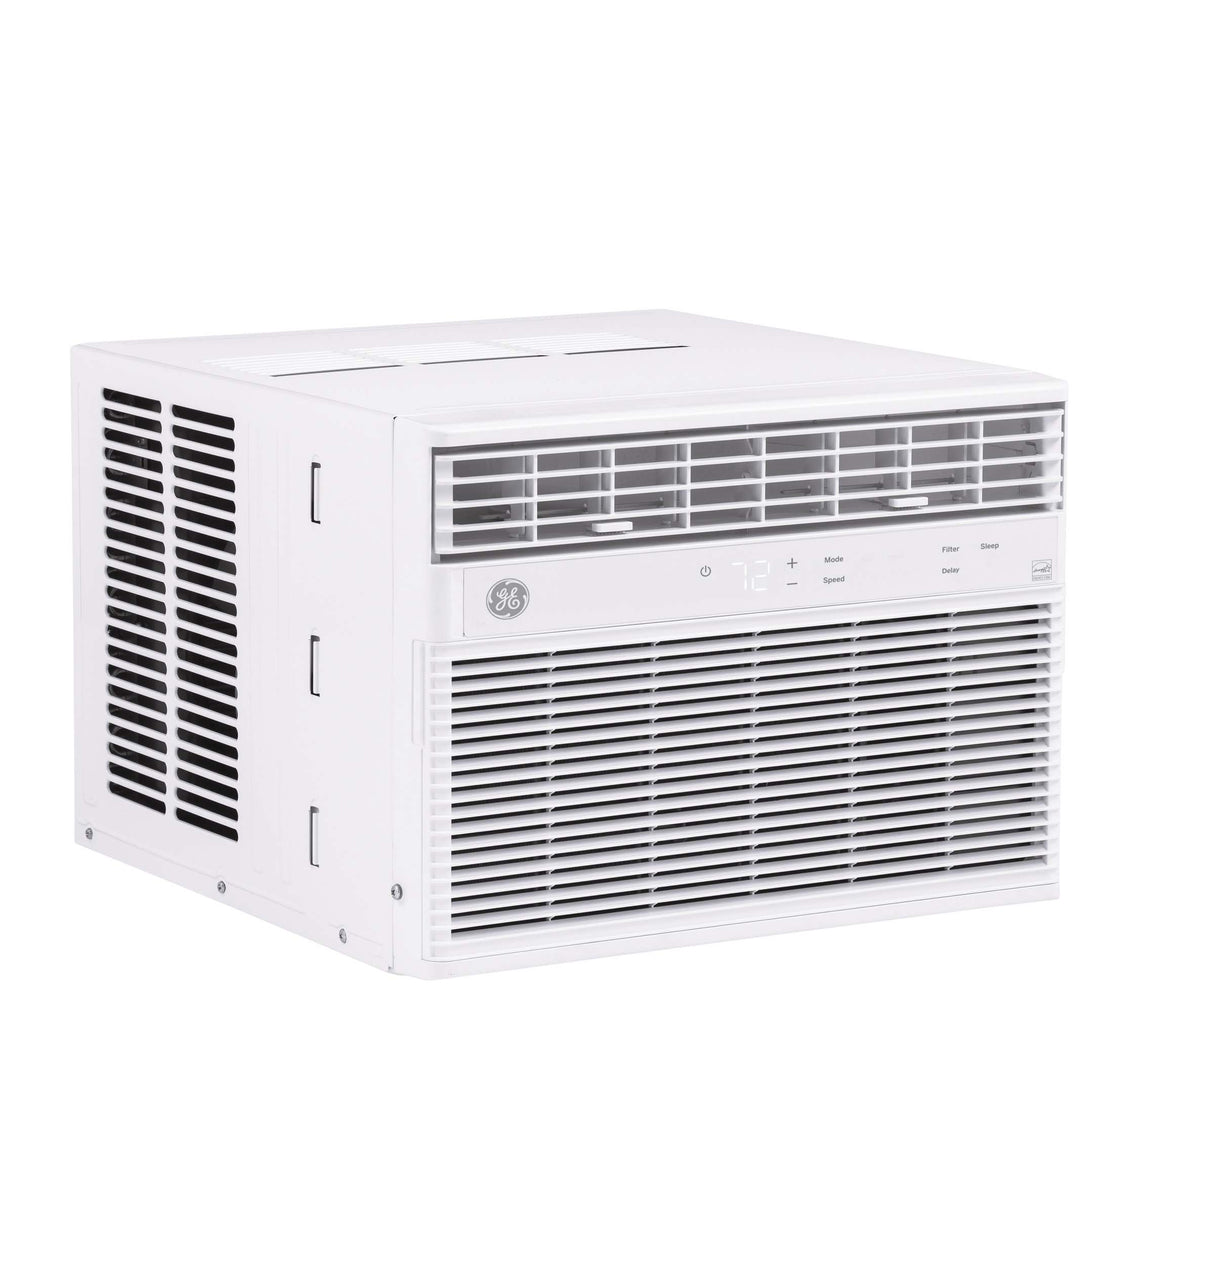 GE(R) 8,000 BTU Heat/Cool Electronic Window Air Conditioner for Medium Rooms up to 350 sq. ft. - (AHE08AZ)